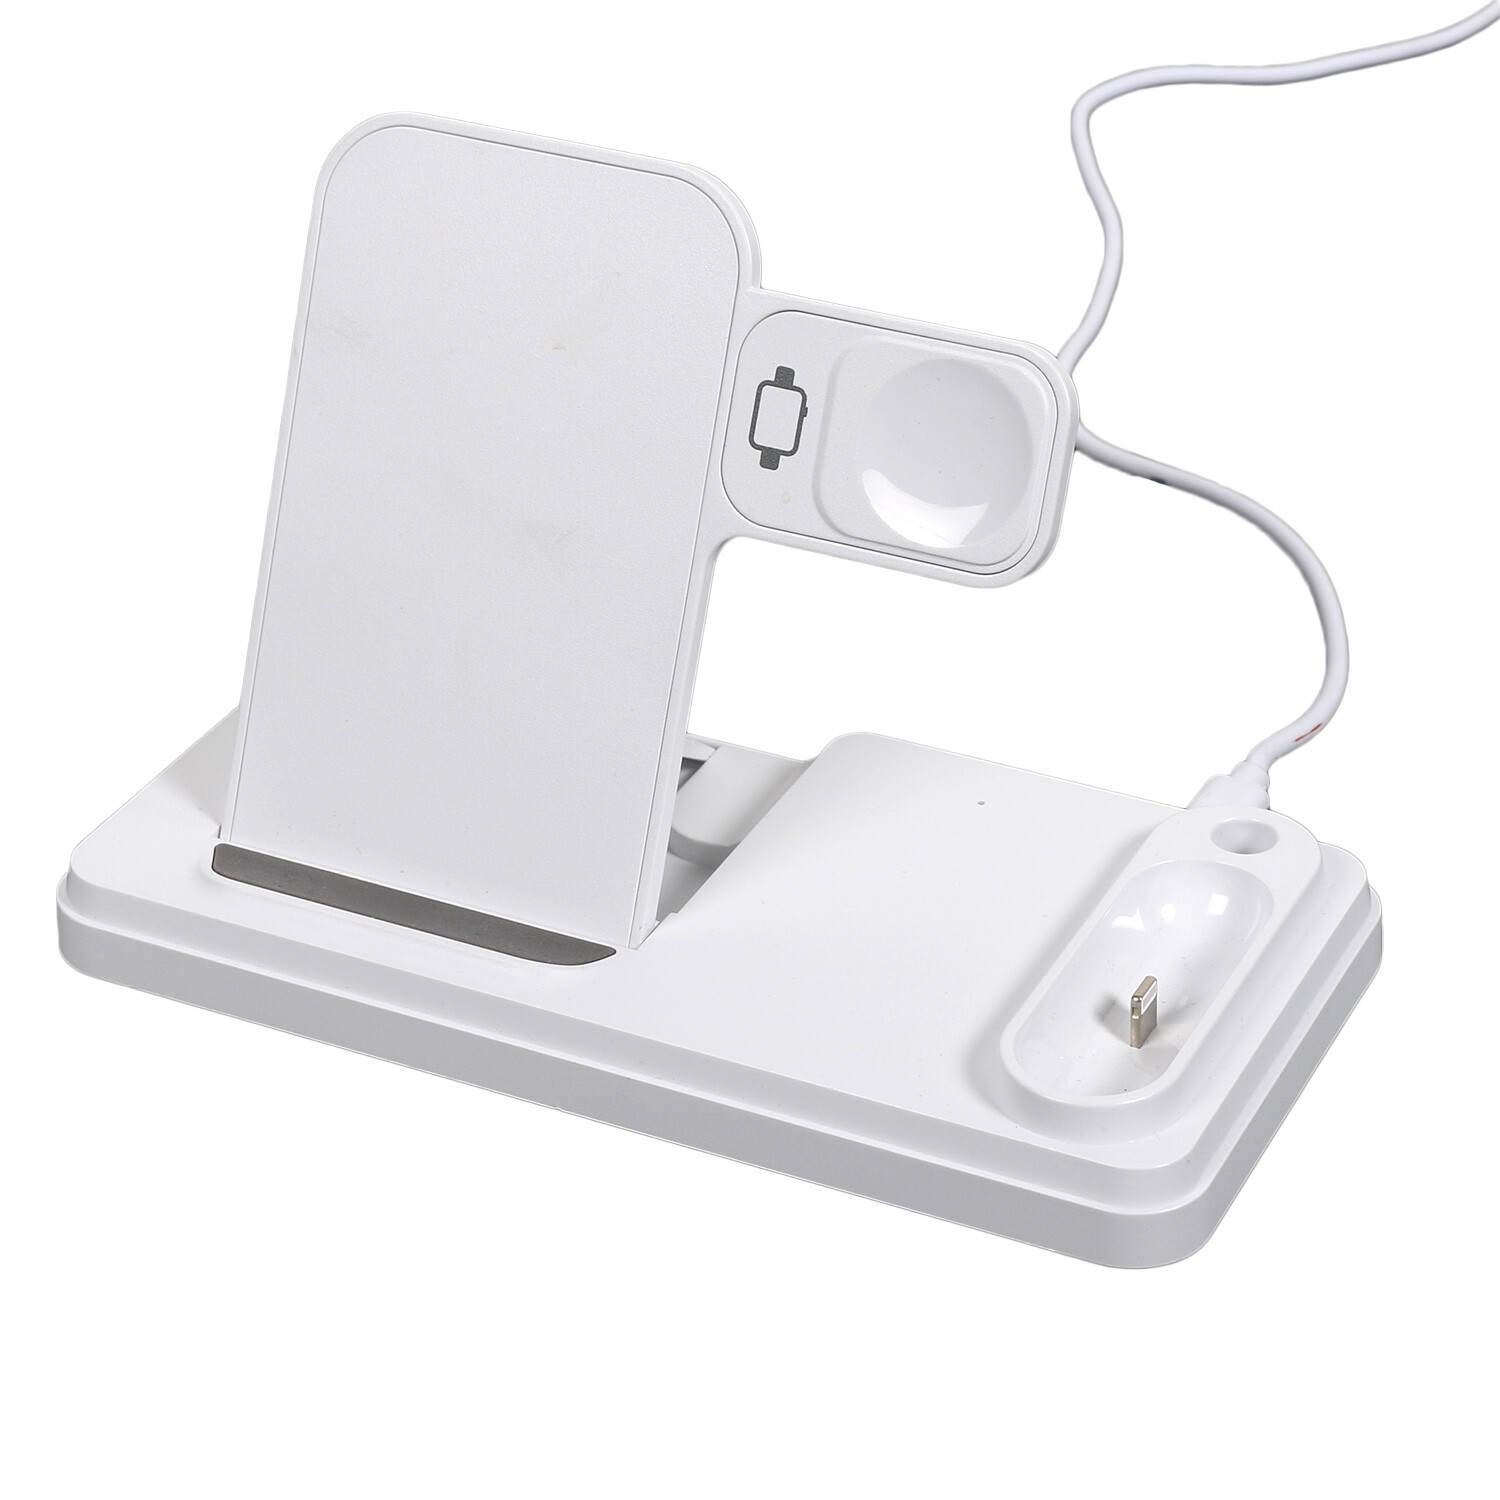 4 in 1 White Charging Stand Image 1